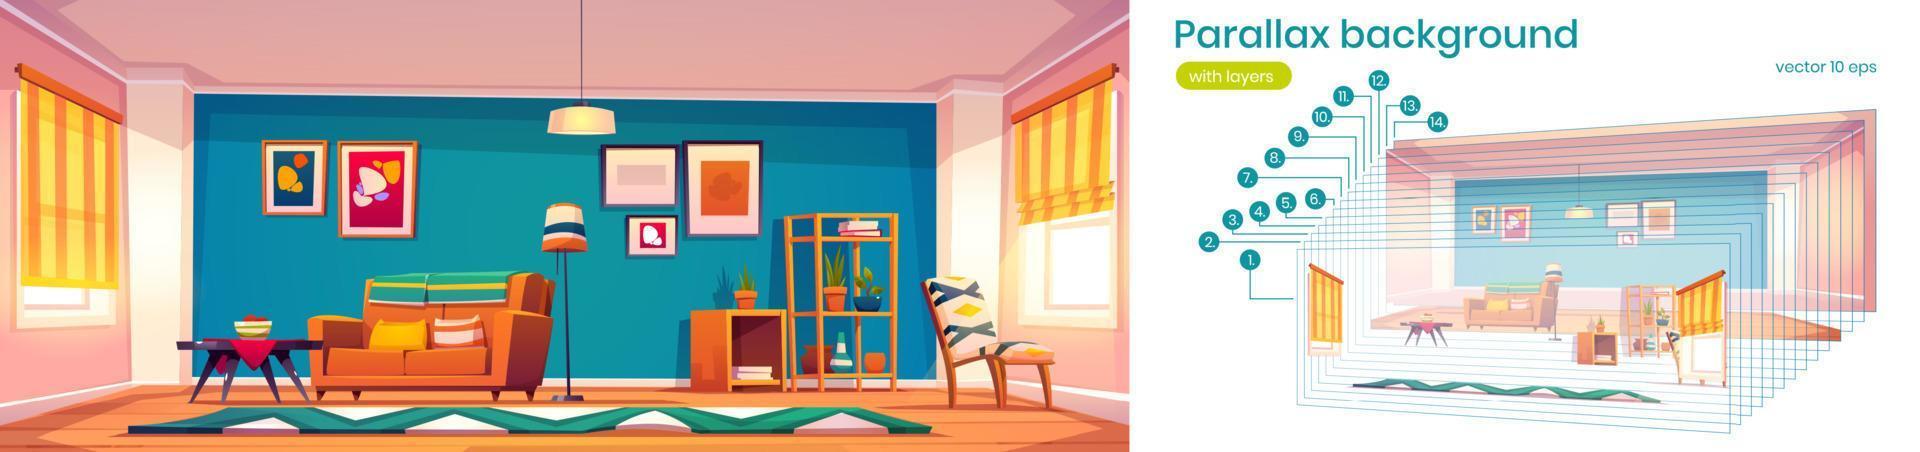 Parallax game background with modern living room vector